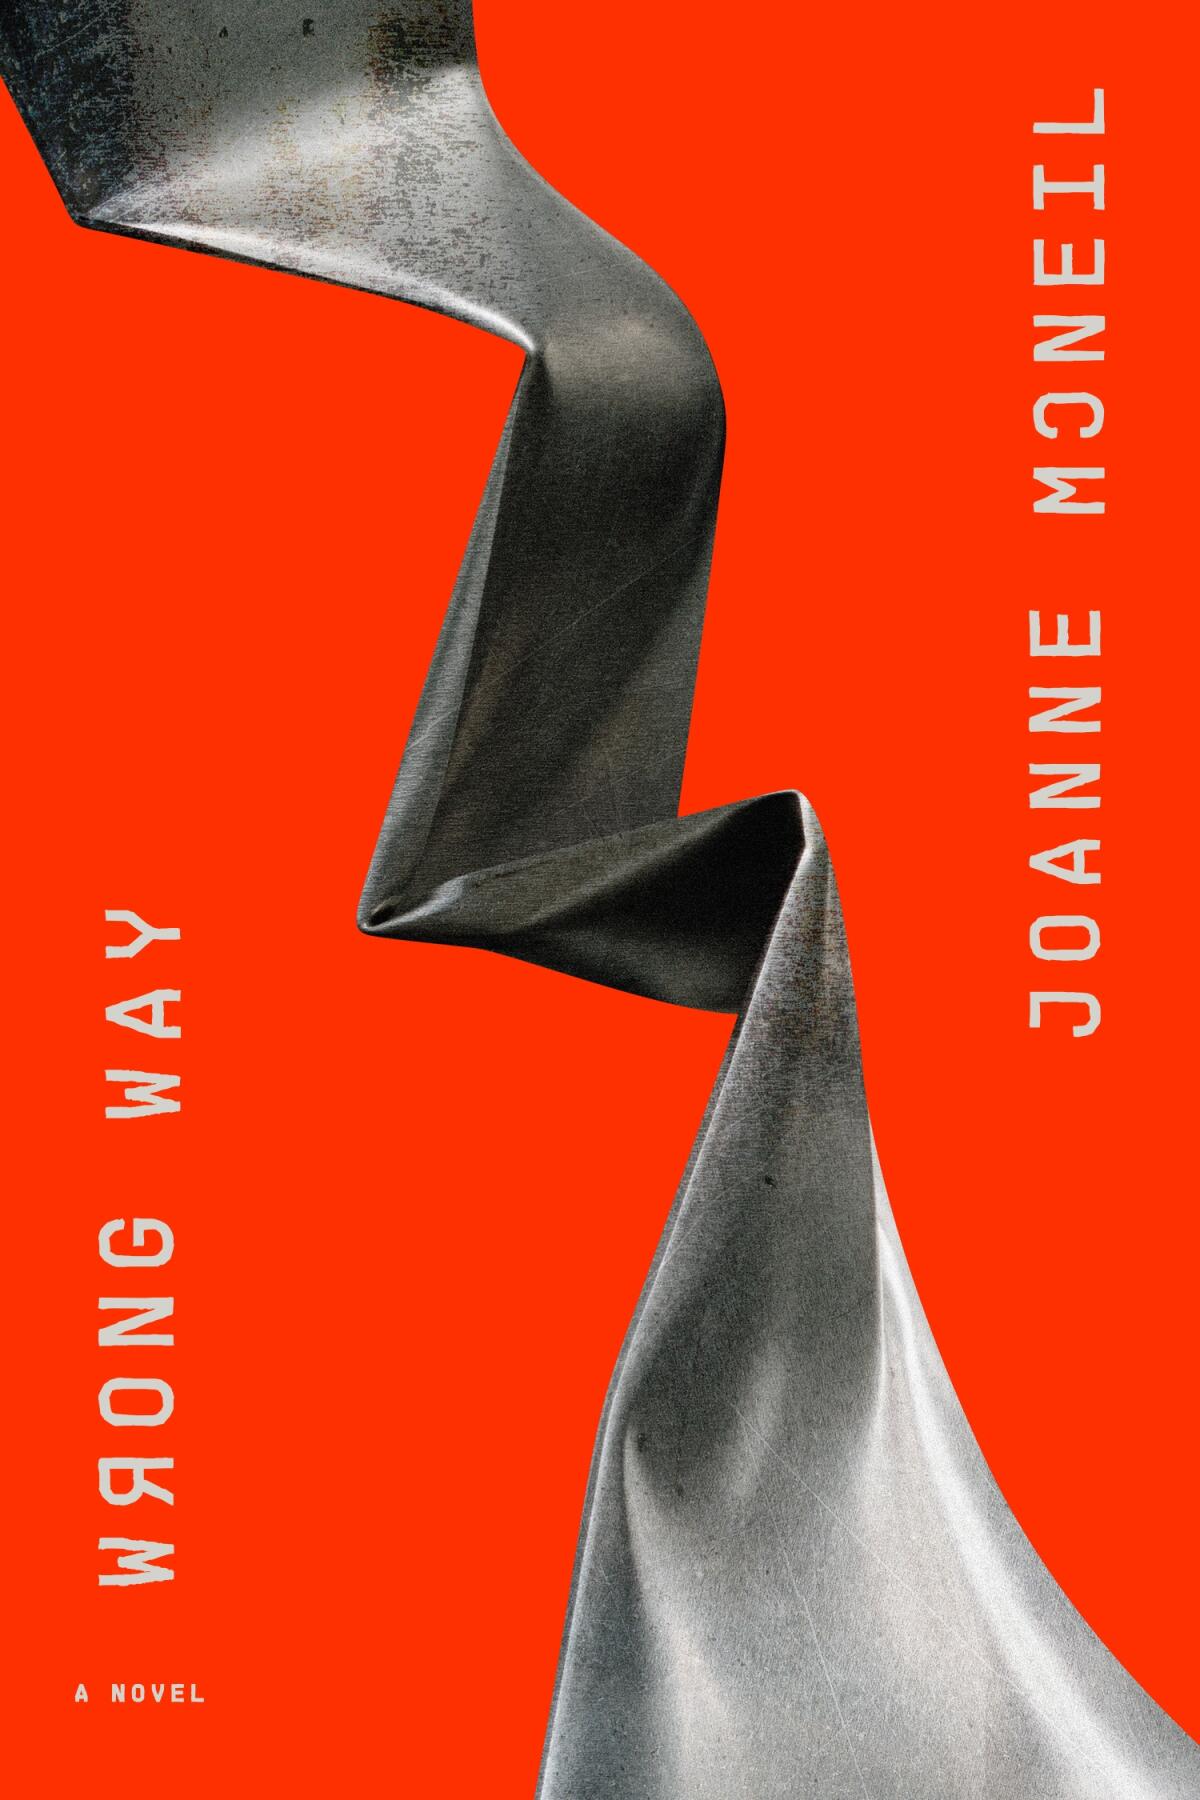 The cover of the book "Wrong Way" features a piece of twisting metal across a red background.